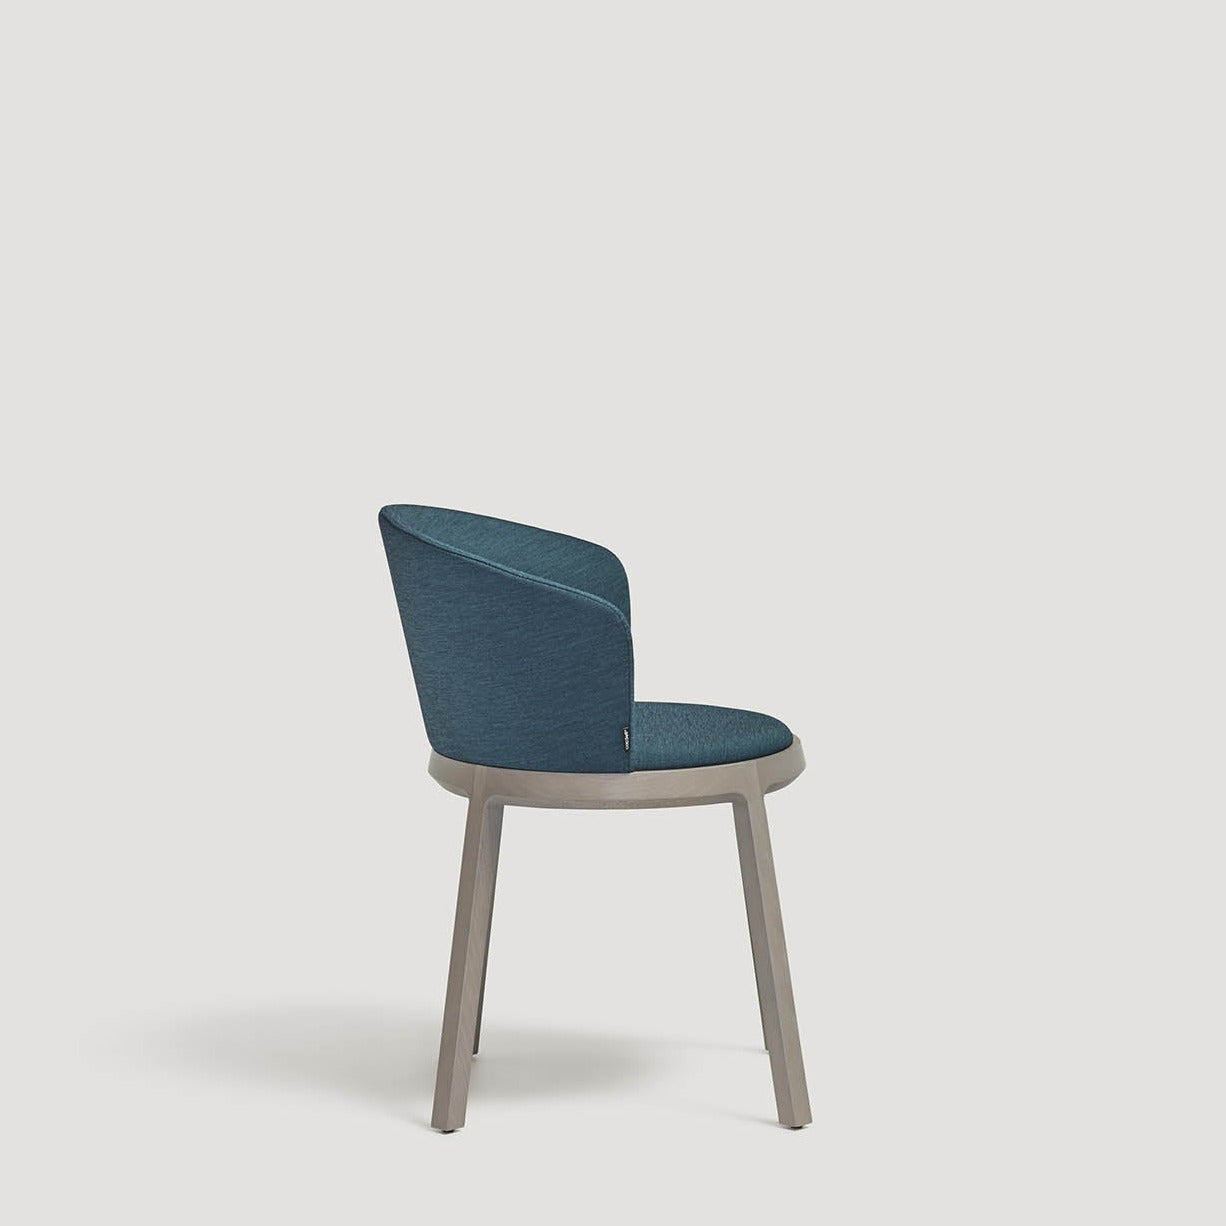 SILLA ARO Chair side view, grey base, upholstered backrest